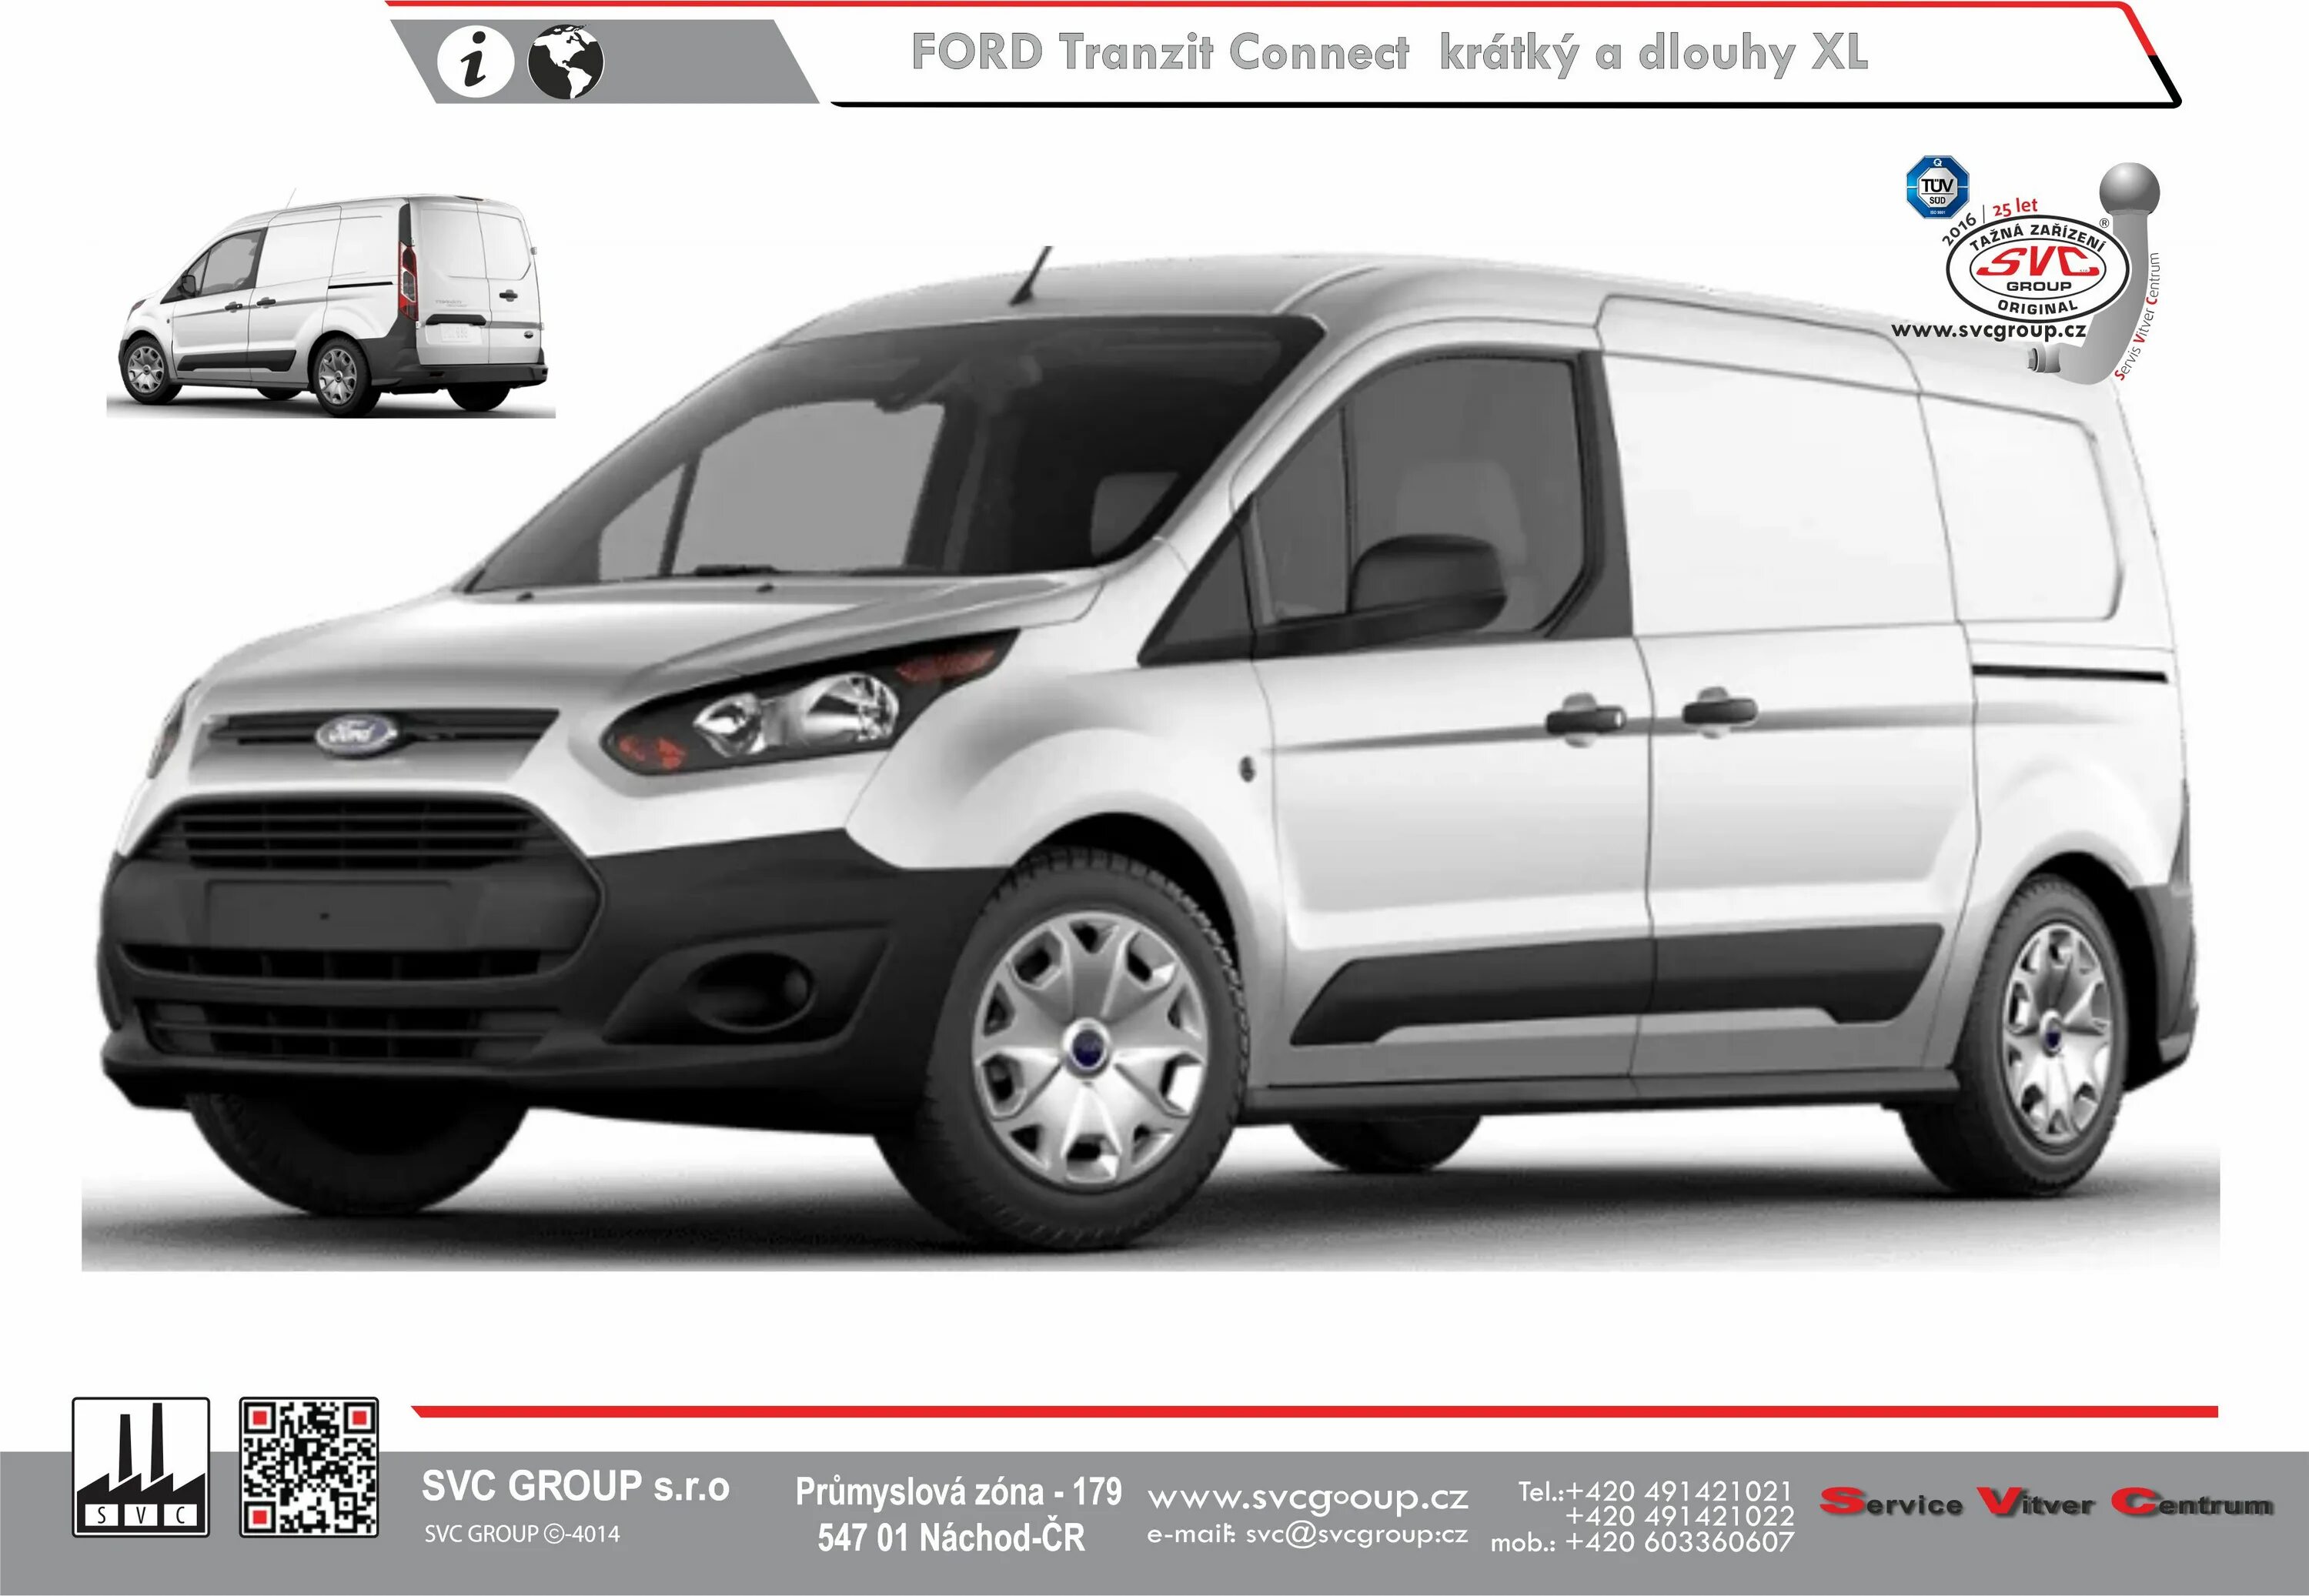 Connect машина. Форд Транзит Коннект 2022. Ford Transit connect фургон. Ford Transit connect 2016. Ford Transit connect 2018.